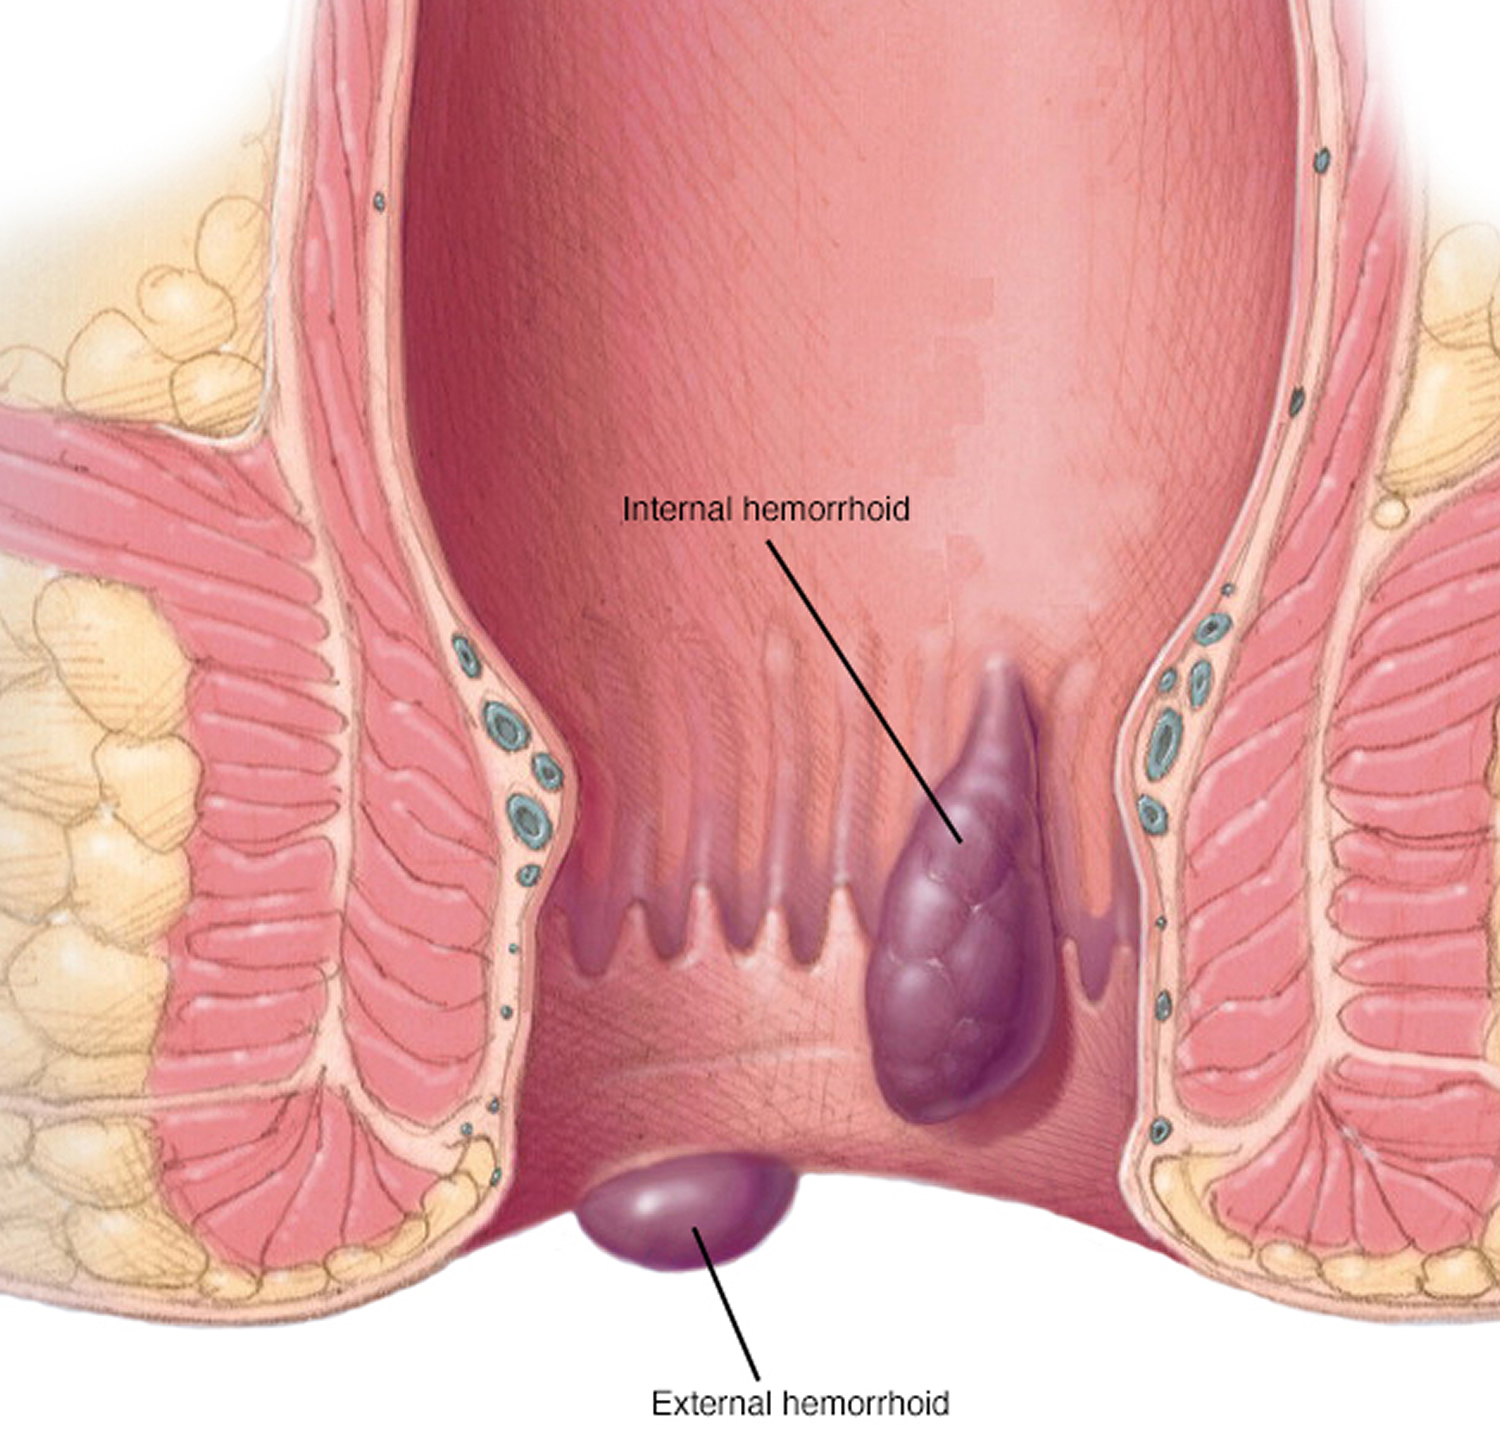 Anal fissure, causes, signs, symptoms, diagnosis & treatment